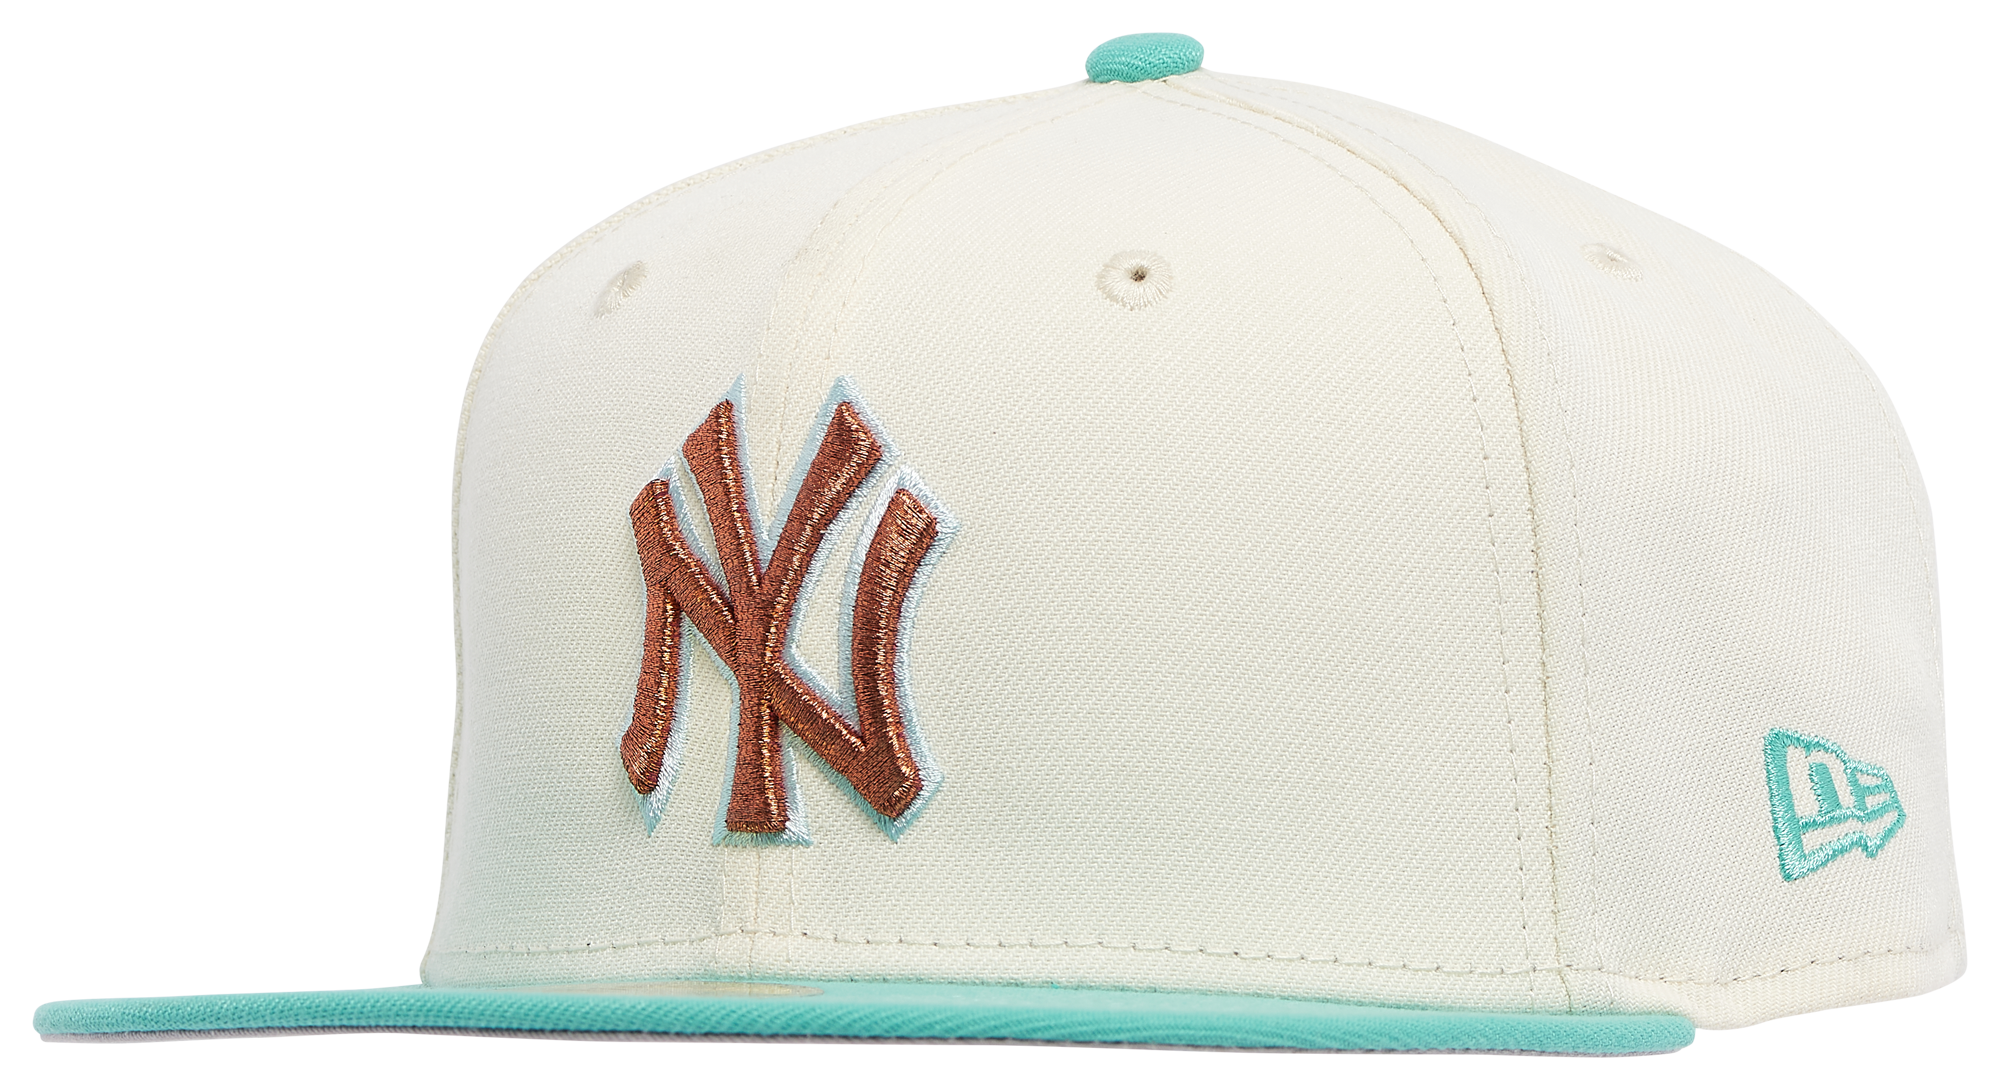 New Era Yankees Two Tone City Icon Fitted Cap